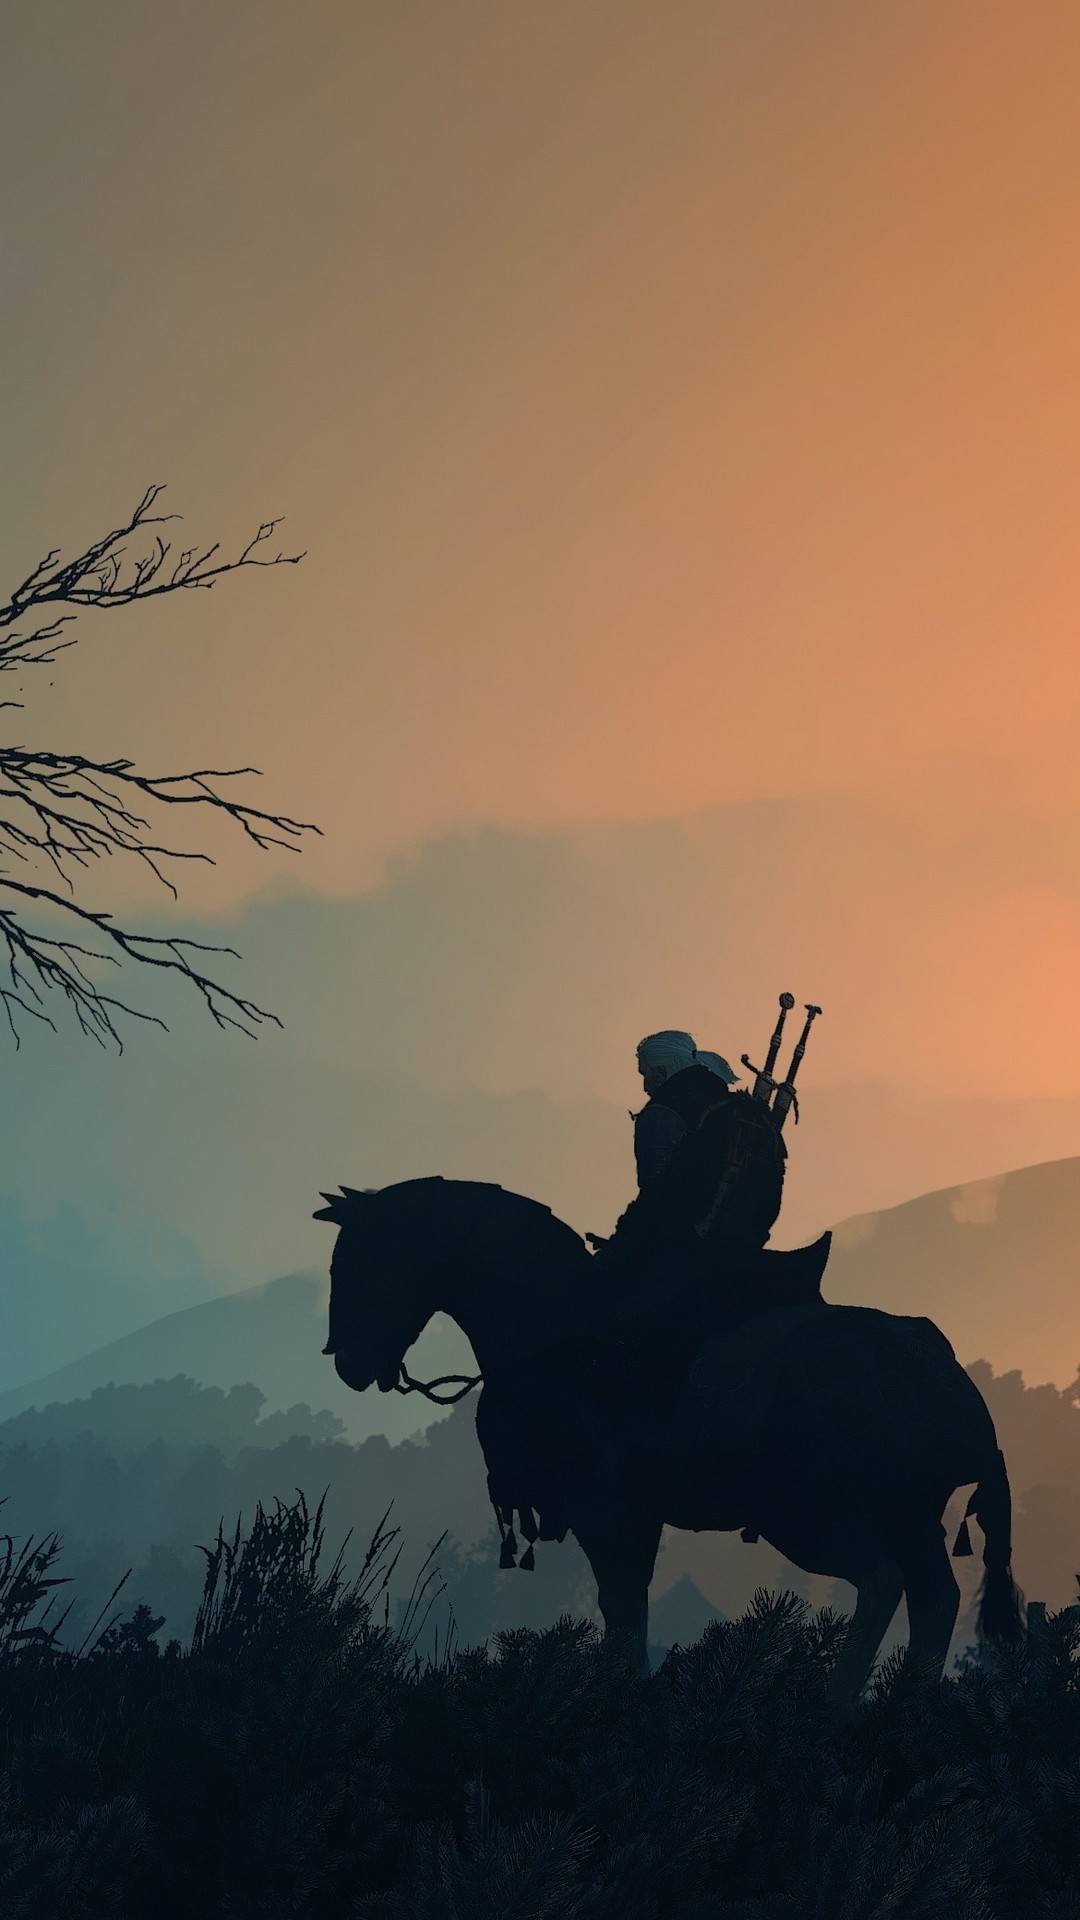 The Witcher HD Wallpapers For Android with high-resolution 1080x1920 pixel. You can use this wallpaper for your Android backgrounds, Tablet, Samsung Screensavers, Mobile Phone Lock Screen and another Smartphones device